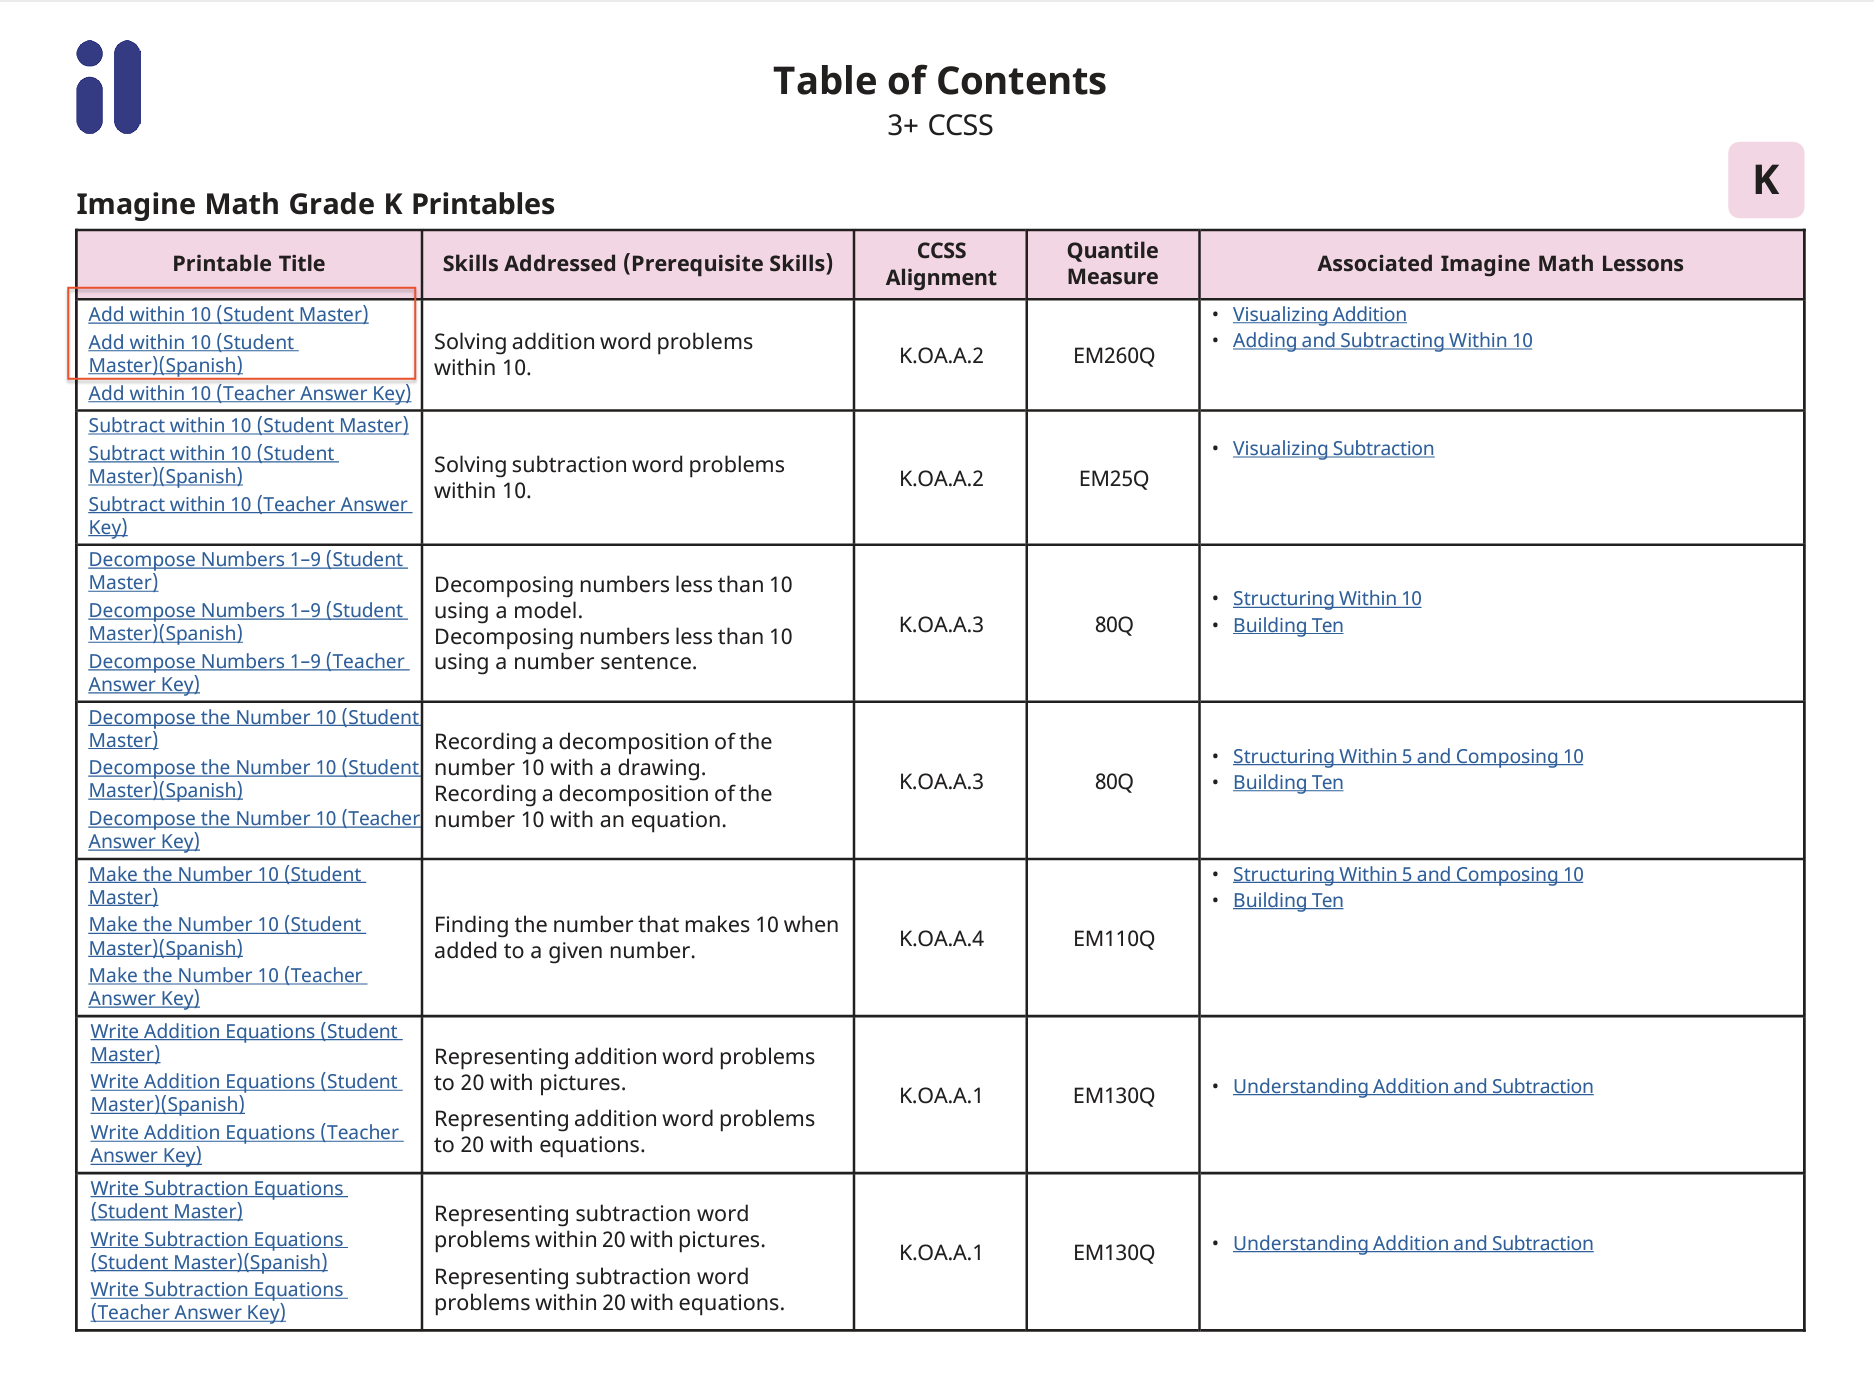 Imagine_Math_Table-of-Contents_Student_Worksheet_Links.png